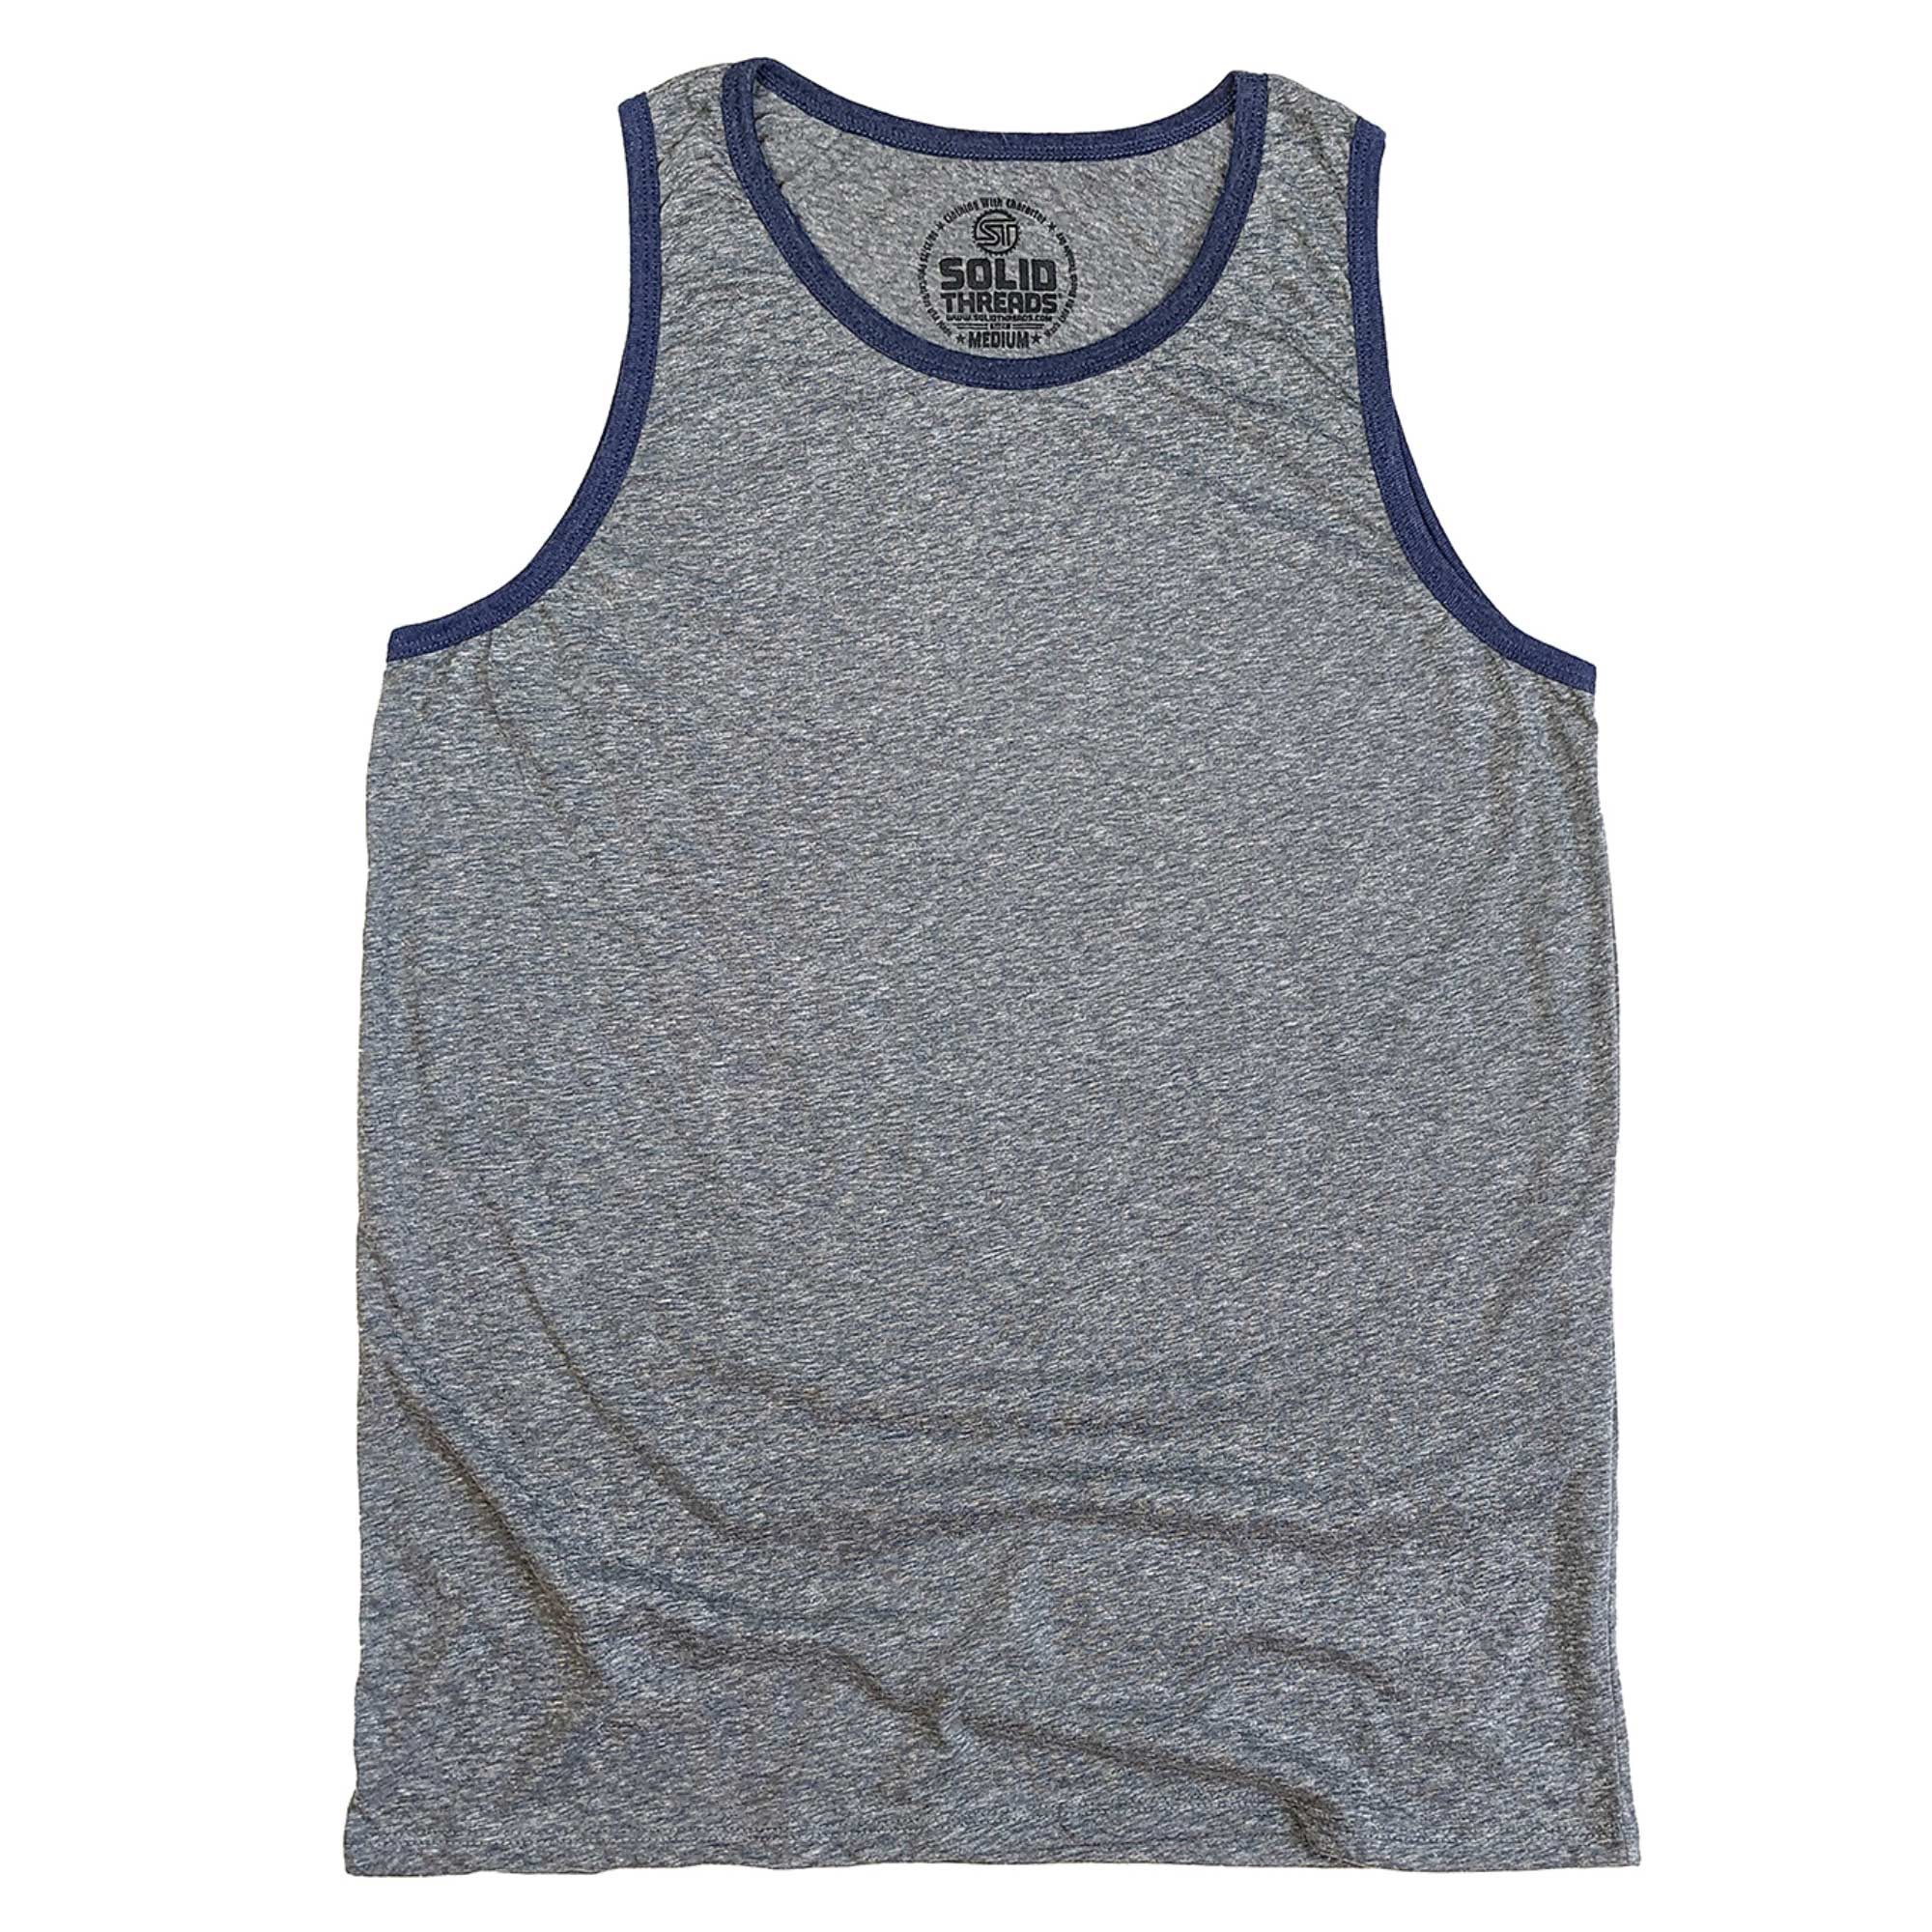 100% Organic Cotton Camisole in Print or Solid Grey